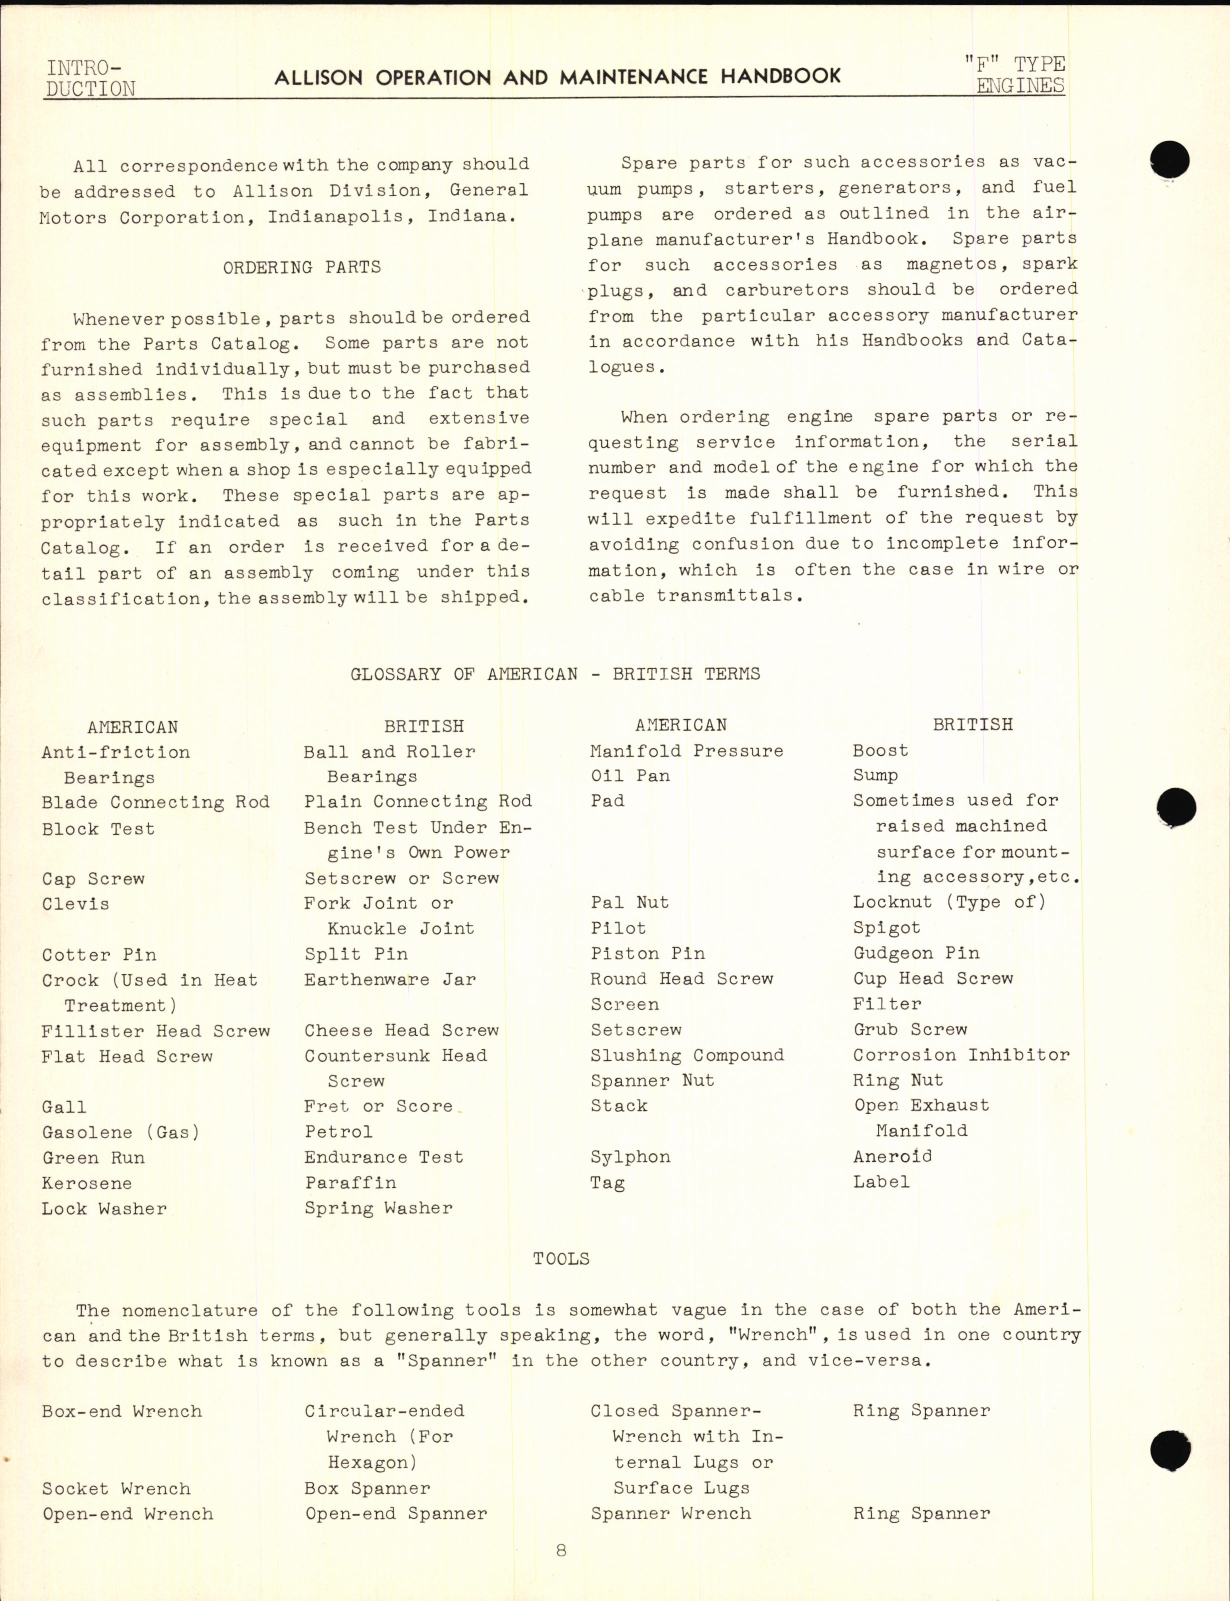 Sample page 12 from AirCorps Library document: Operation Maintenance and Overhaul Handbook for V-1710 